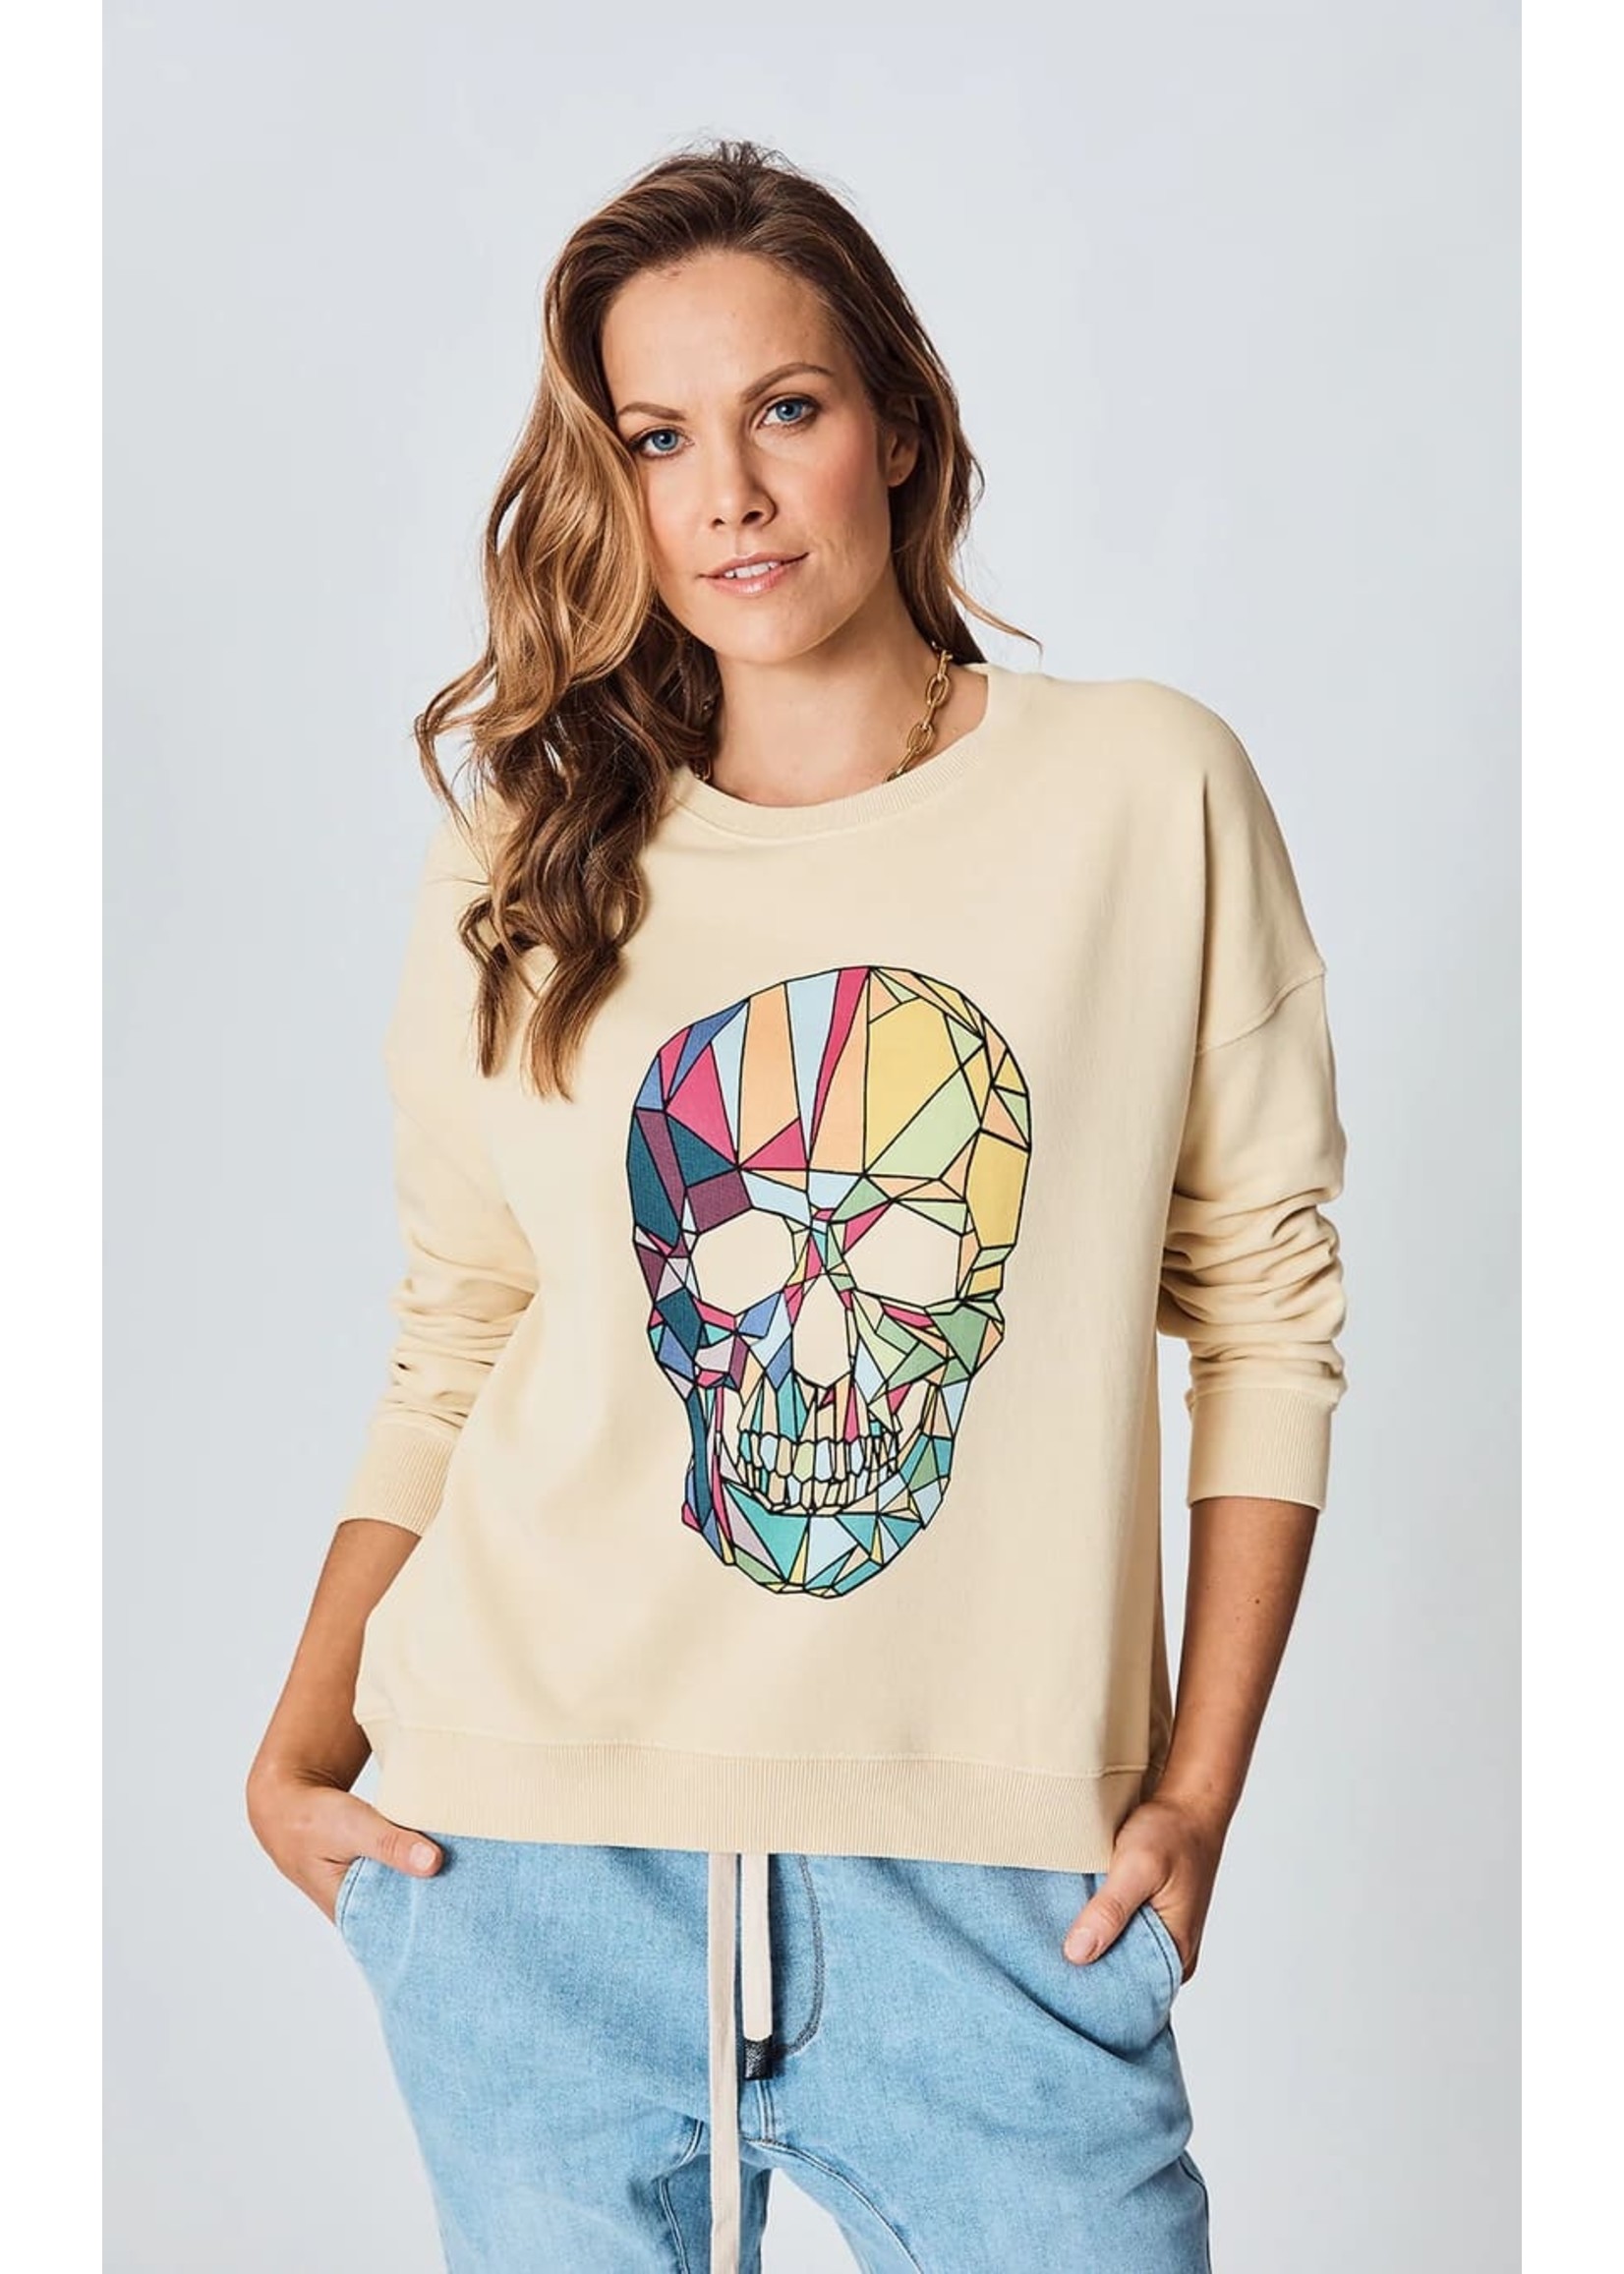 We Are the Others We Are The Others - The Slouch Sweatshirt